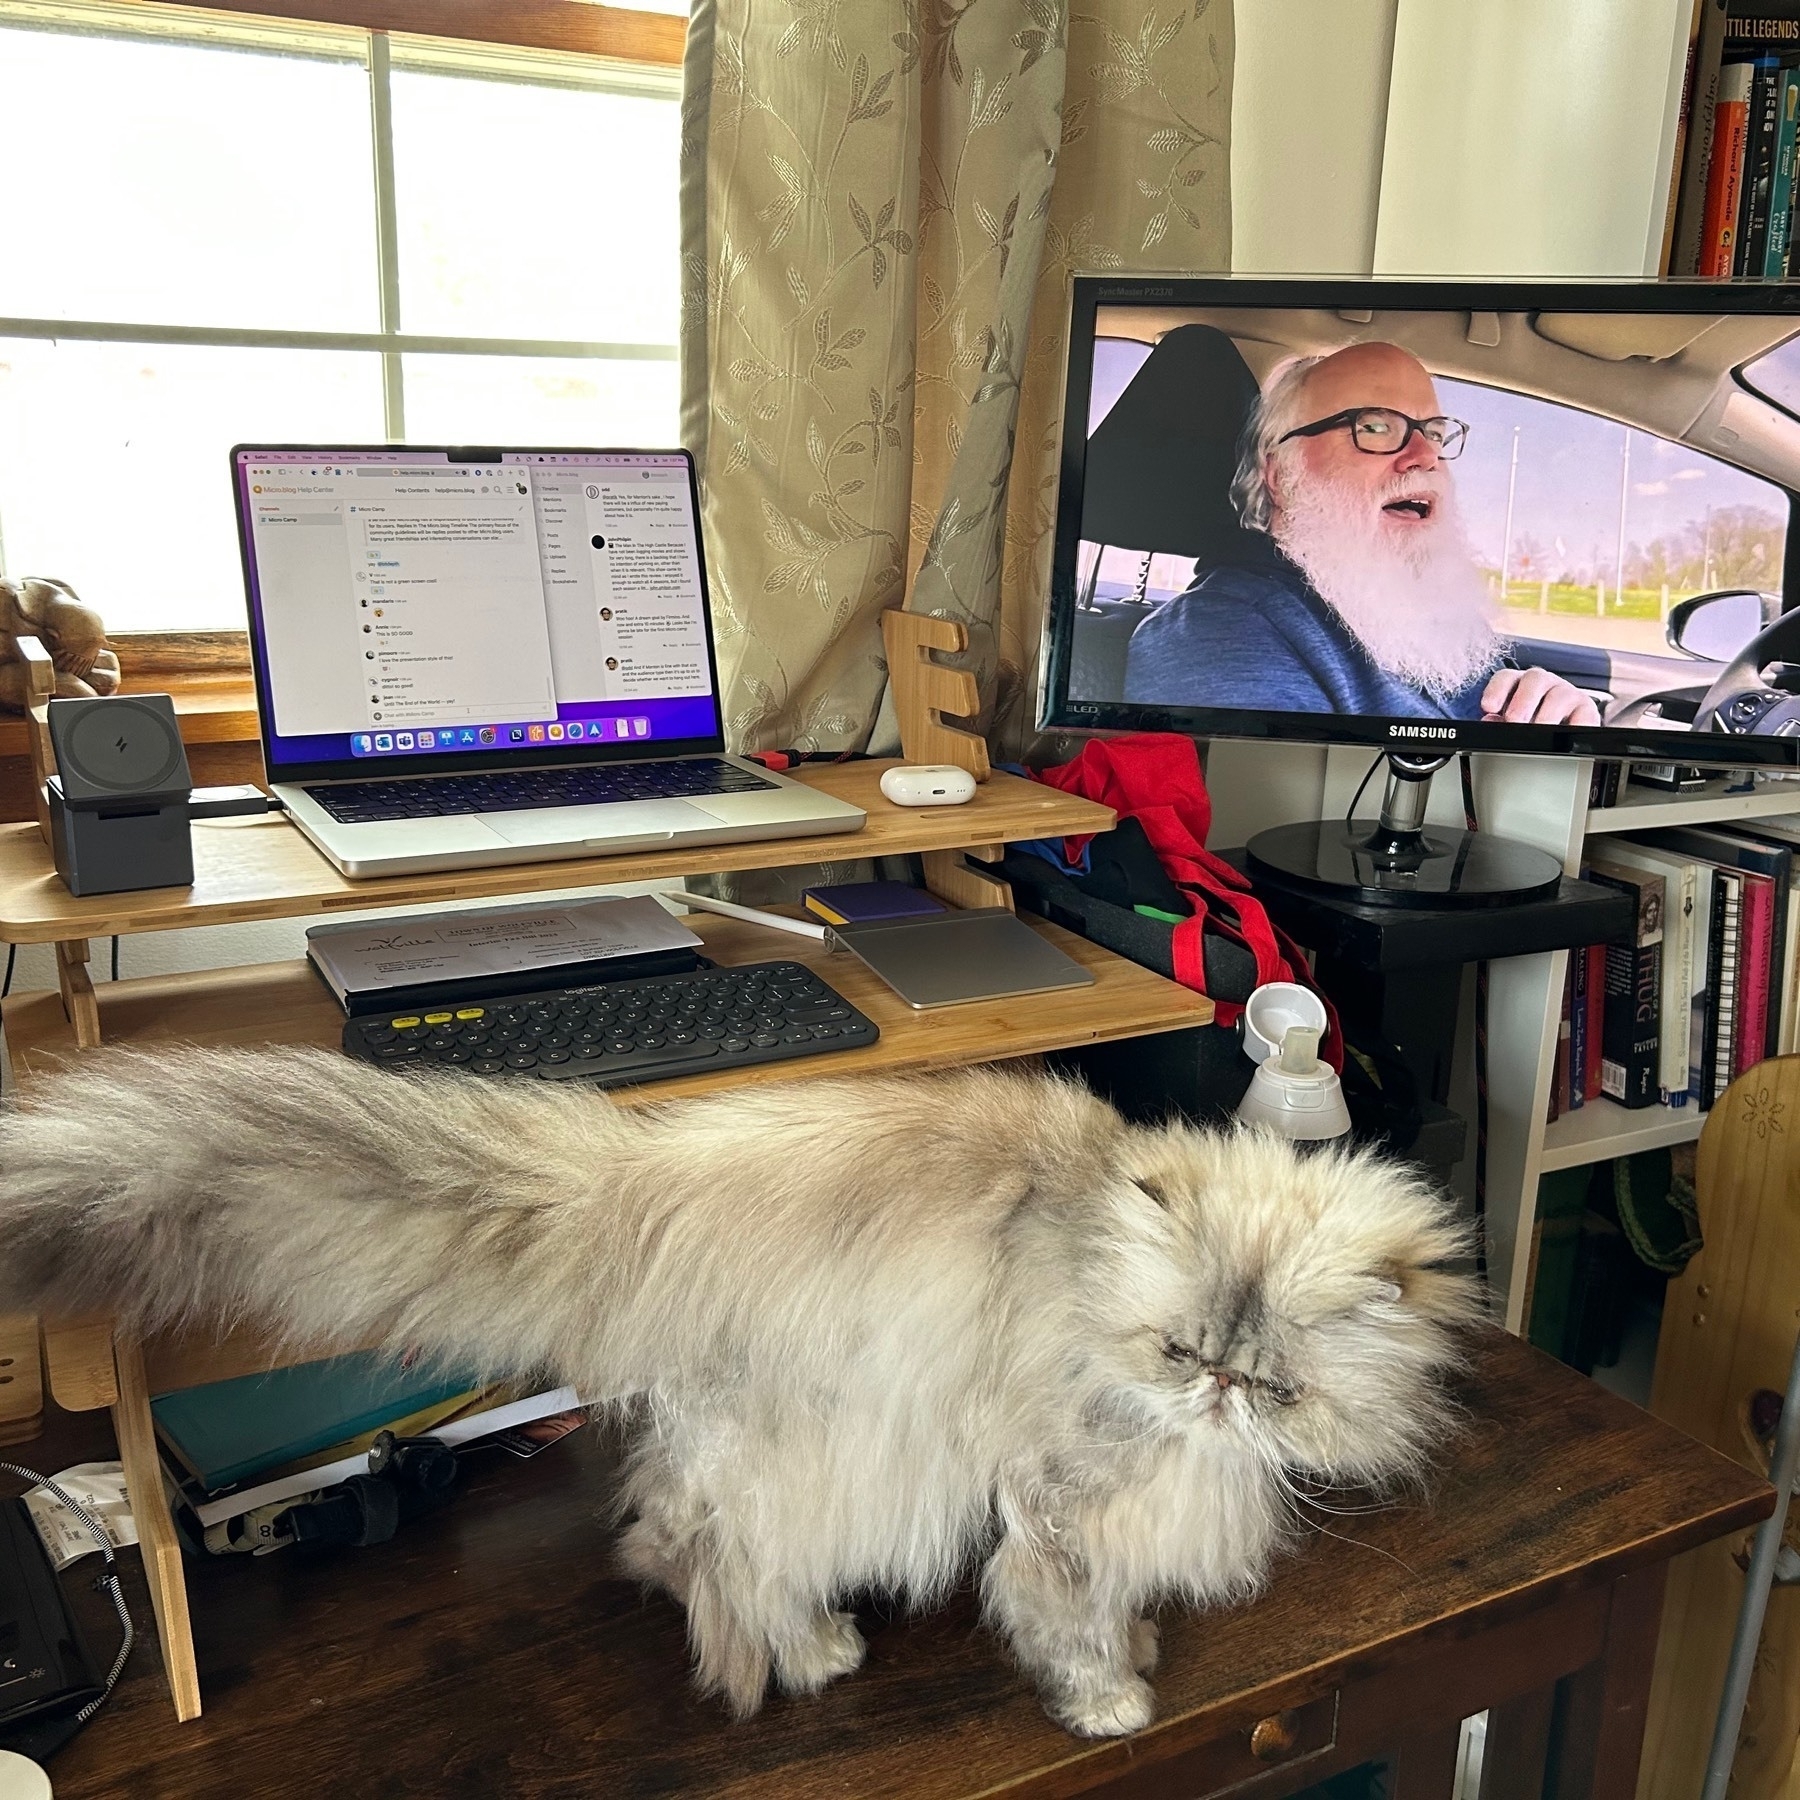 White cat on desk with laptop computer and monitor in background with a bearded man on the screen. 